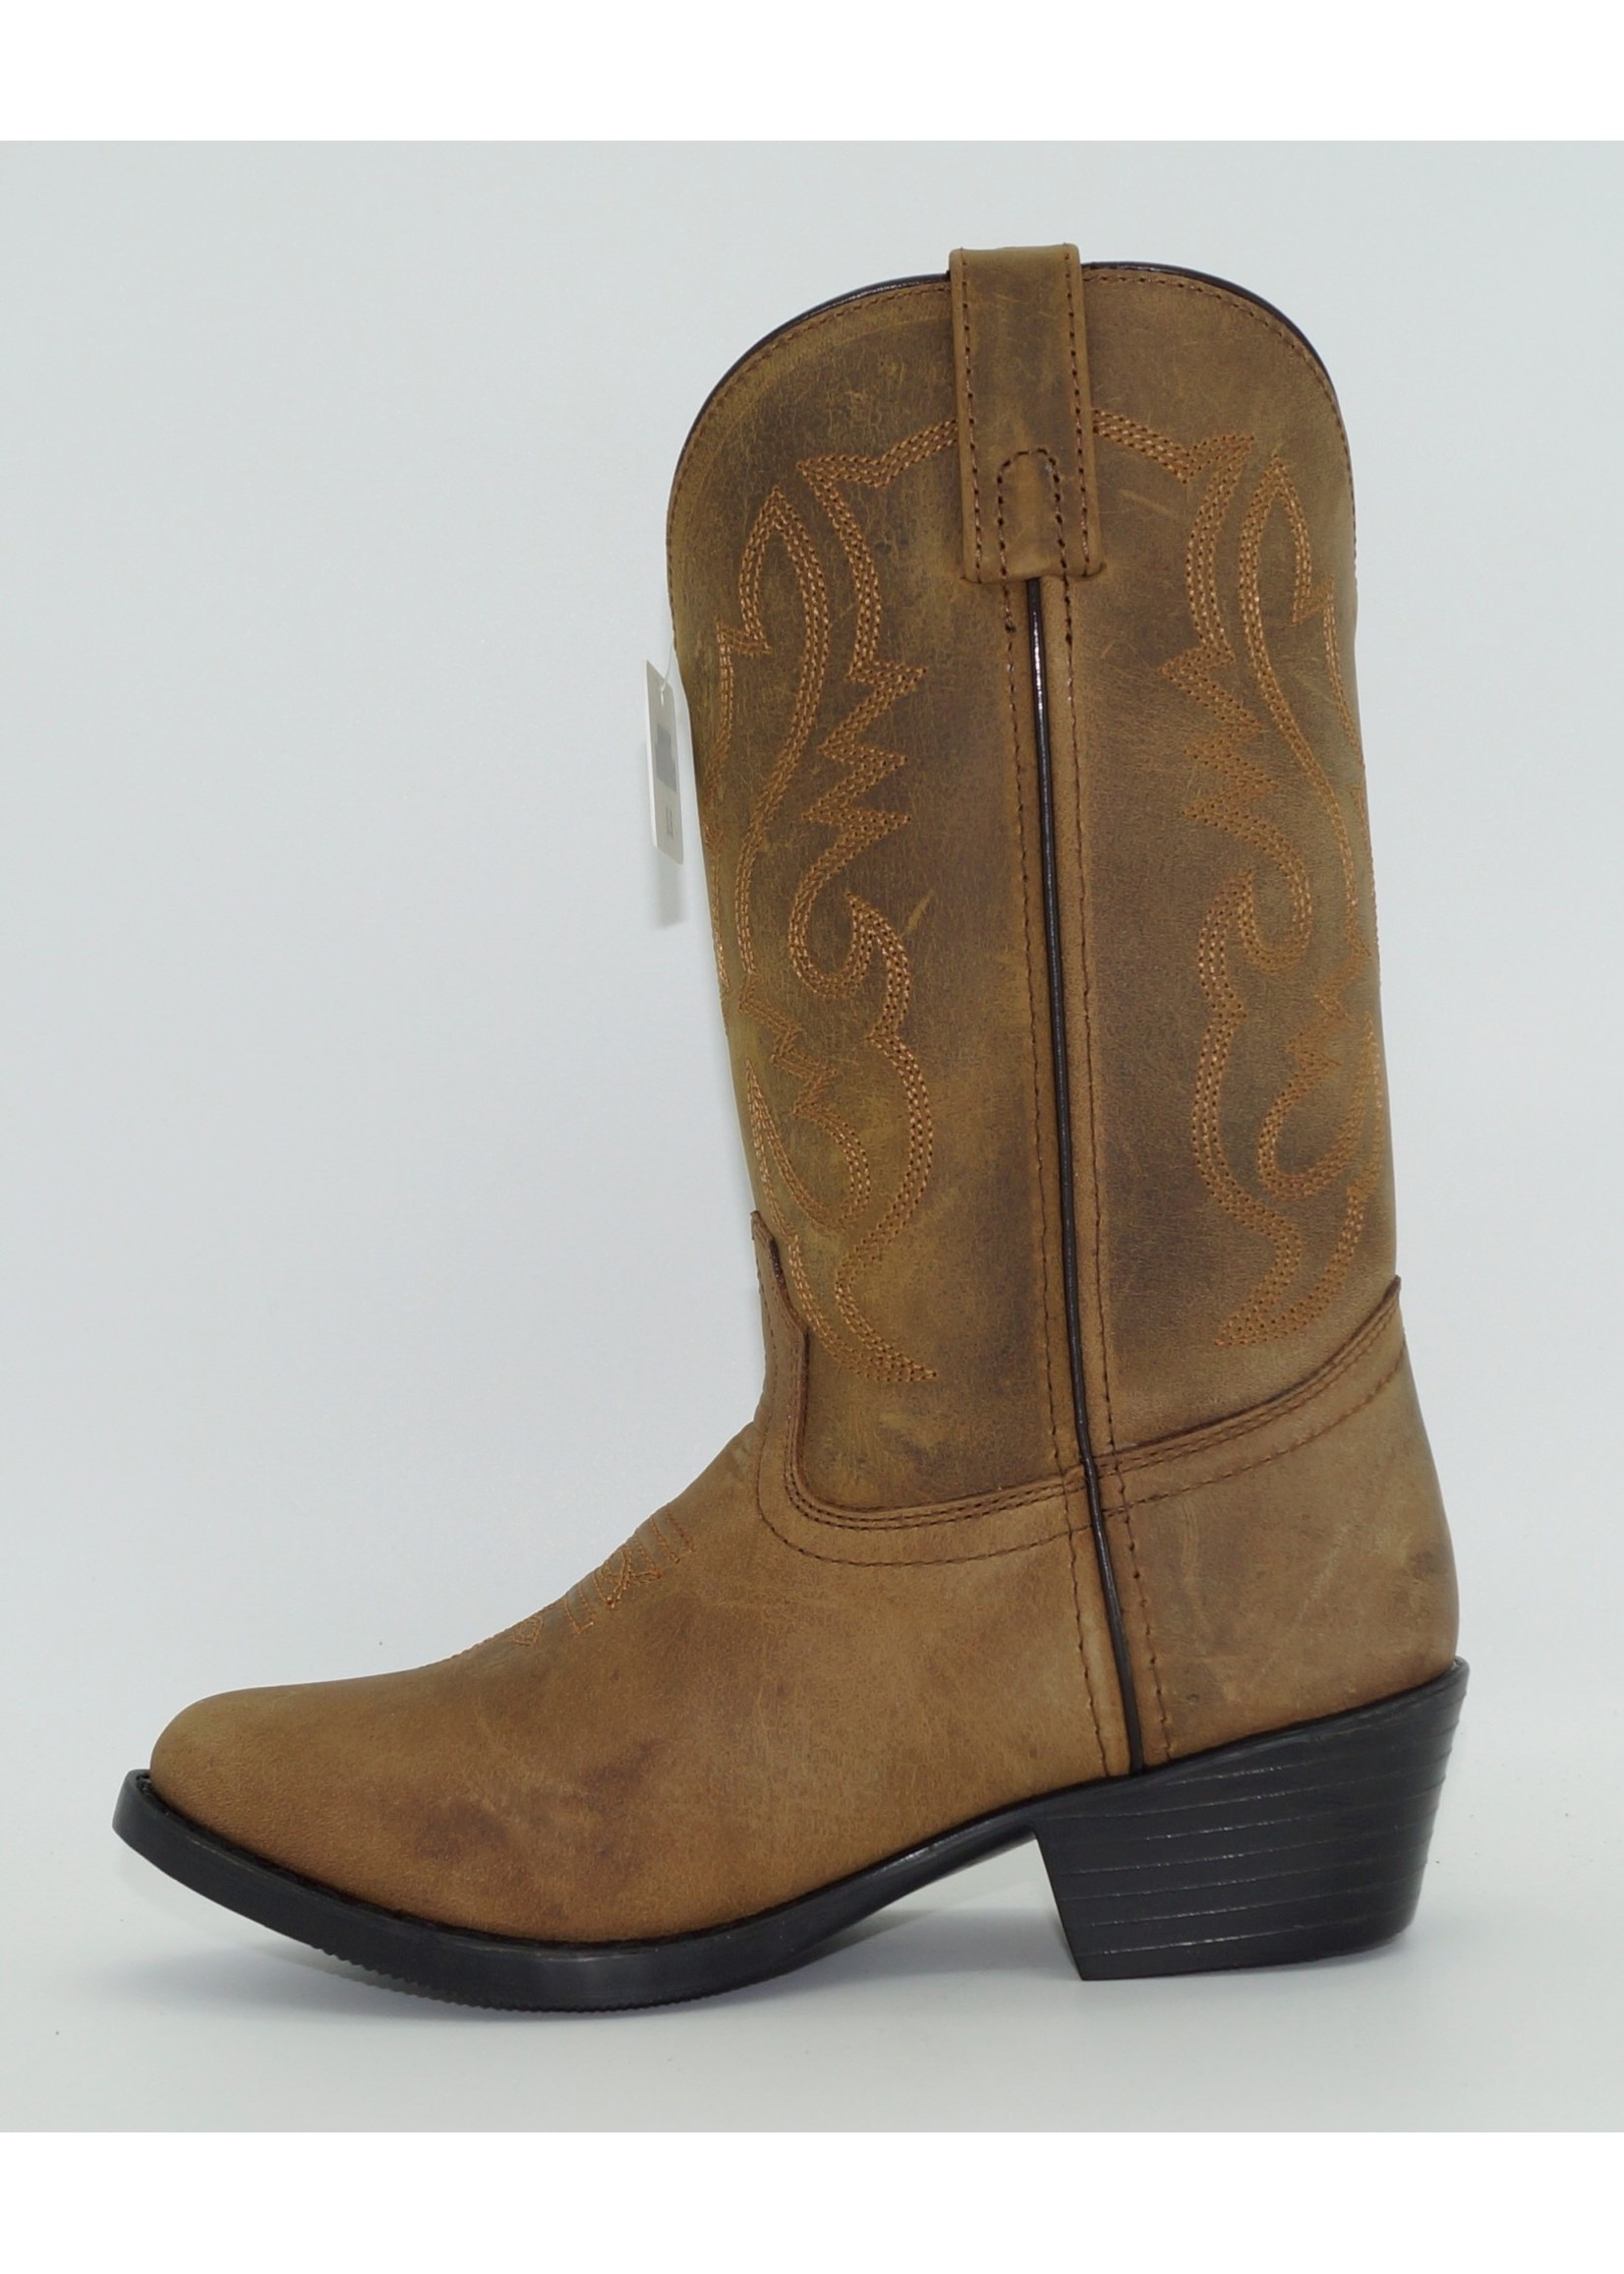 Smokey Mountain Youth Brown Western boot 3034Y-Denver